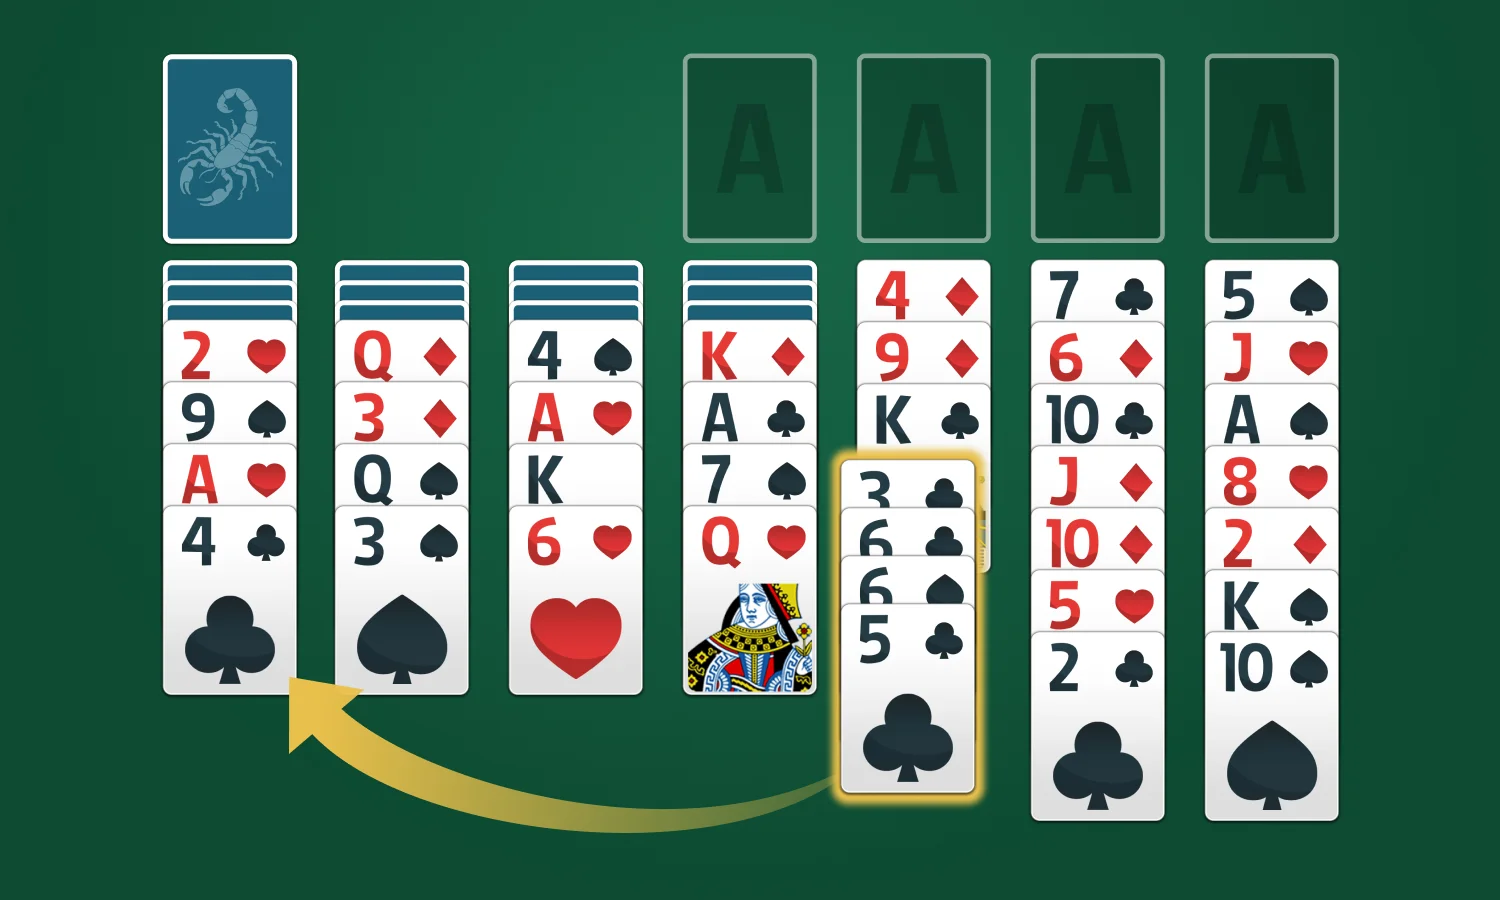 How to Play Scorpion Solitaire